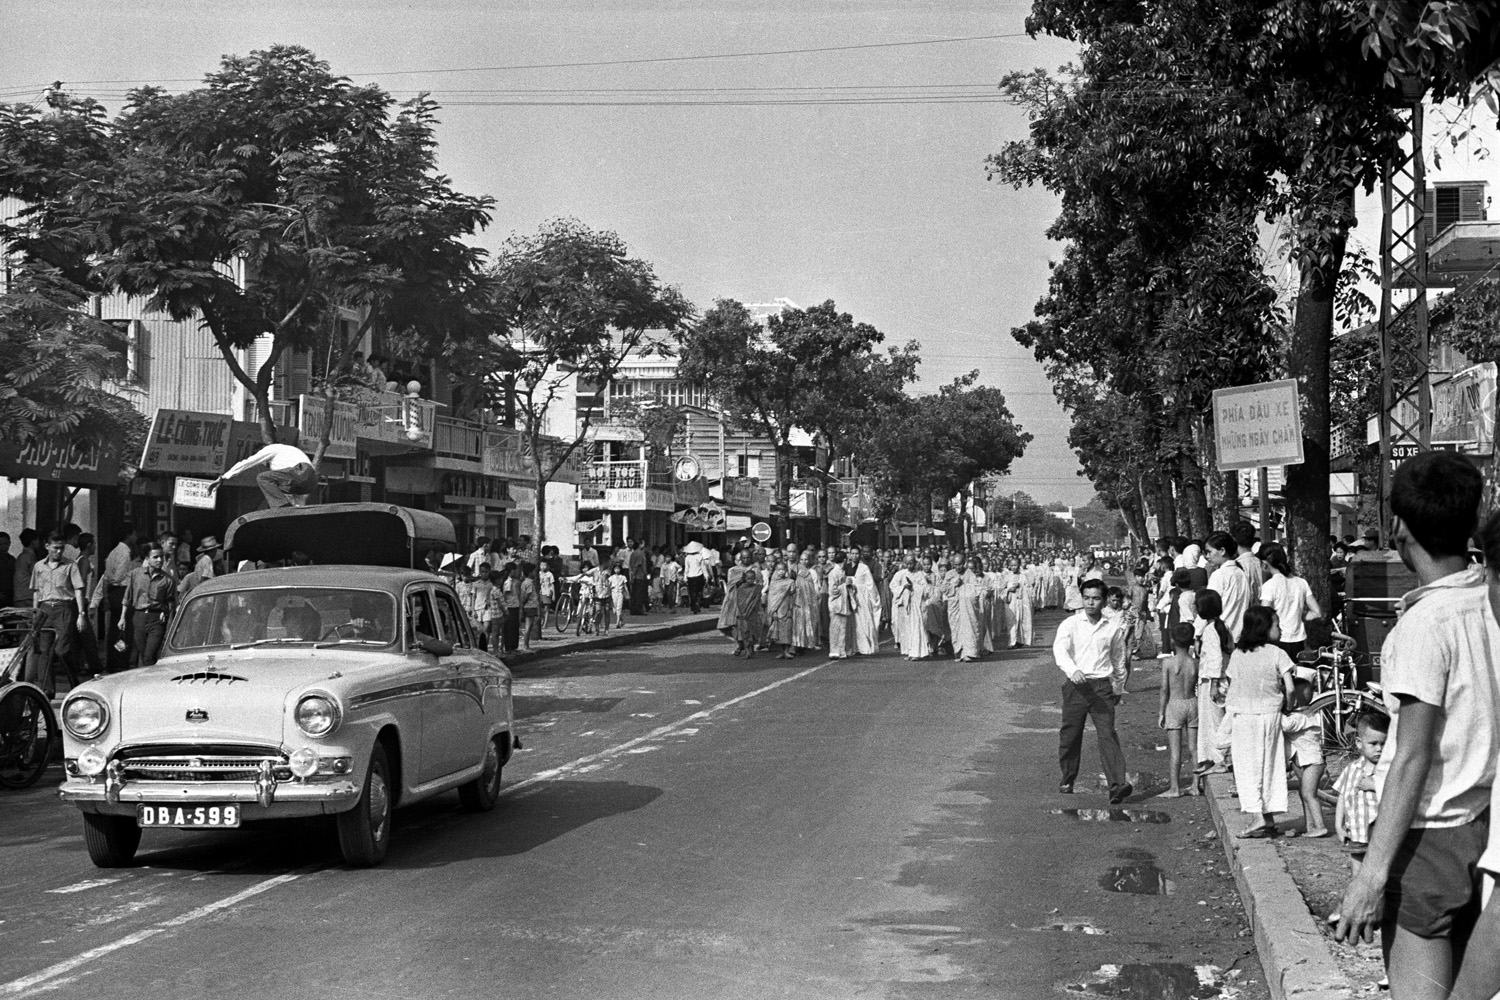 The Buddhist protestors walked from the pagoda to central Saigon.